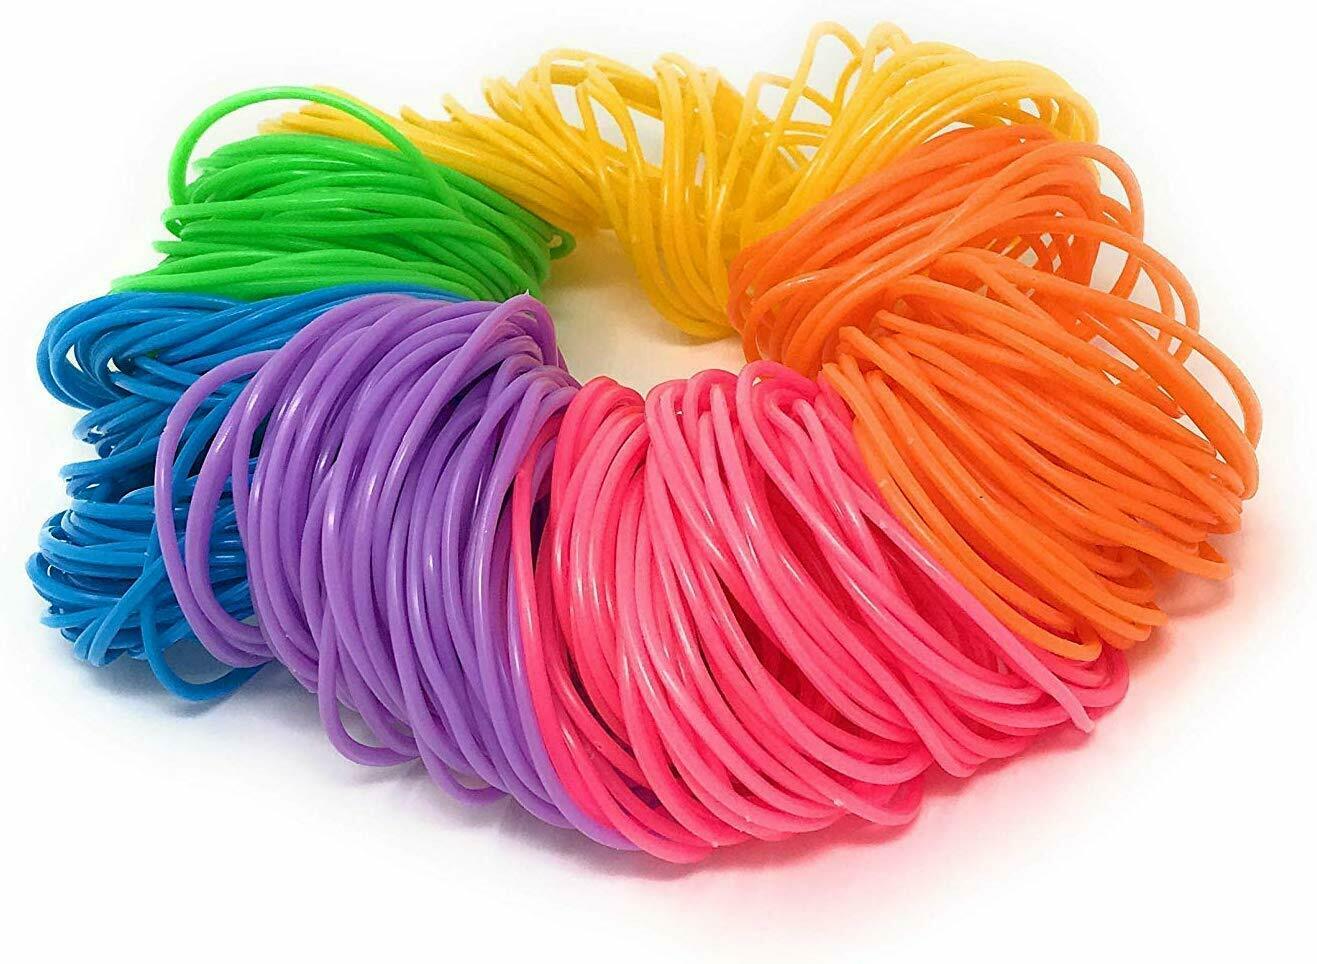 144pk Neon Jelly Bracelets Rainbow Color Birthday Party Favors Gifts Toy Prizes